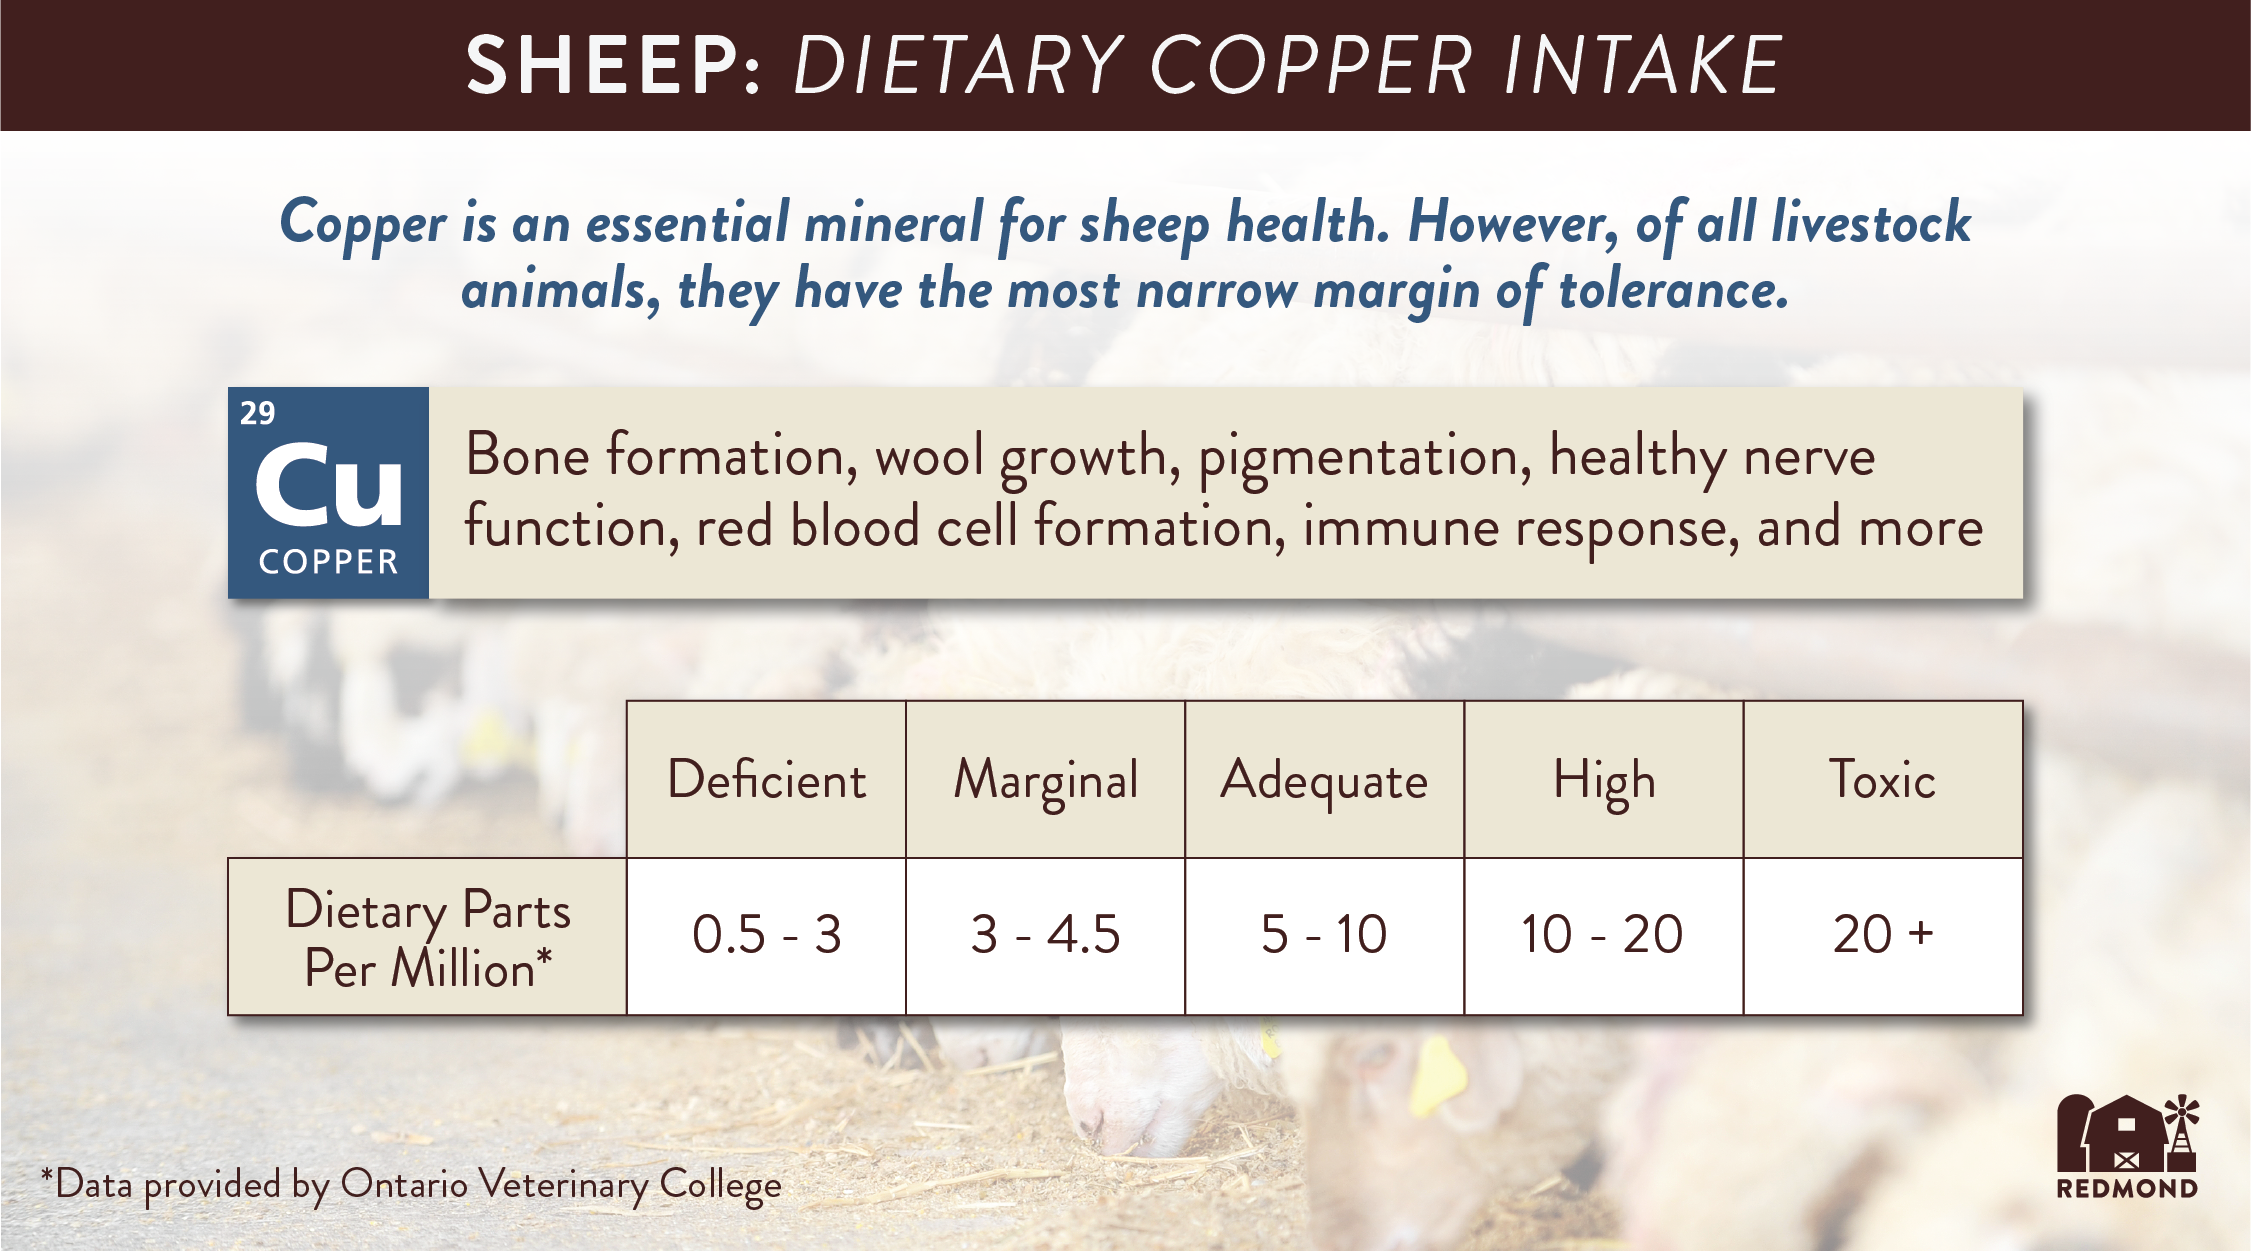 How much copper can sheep have